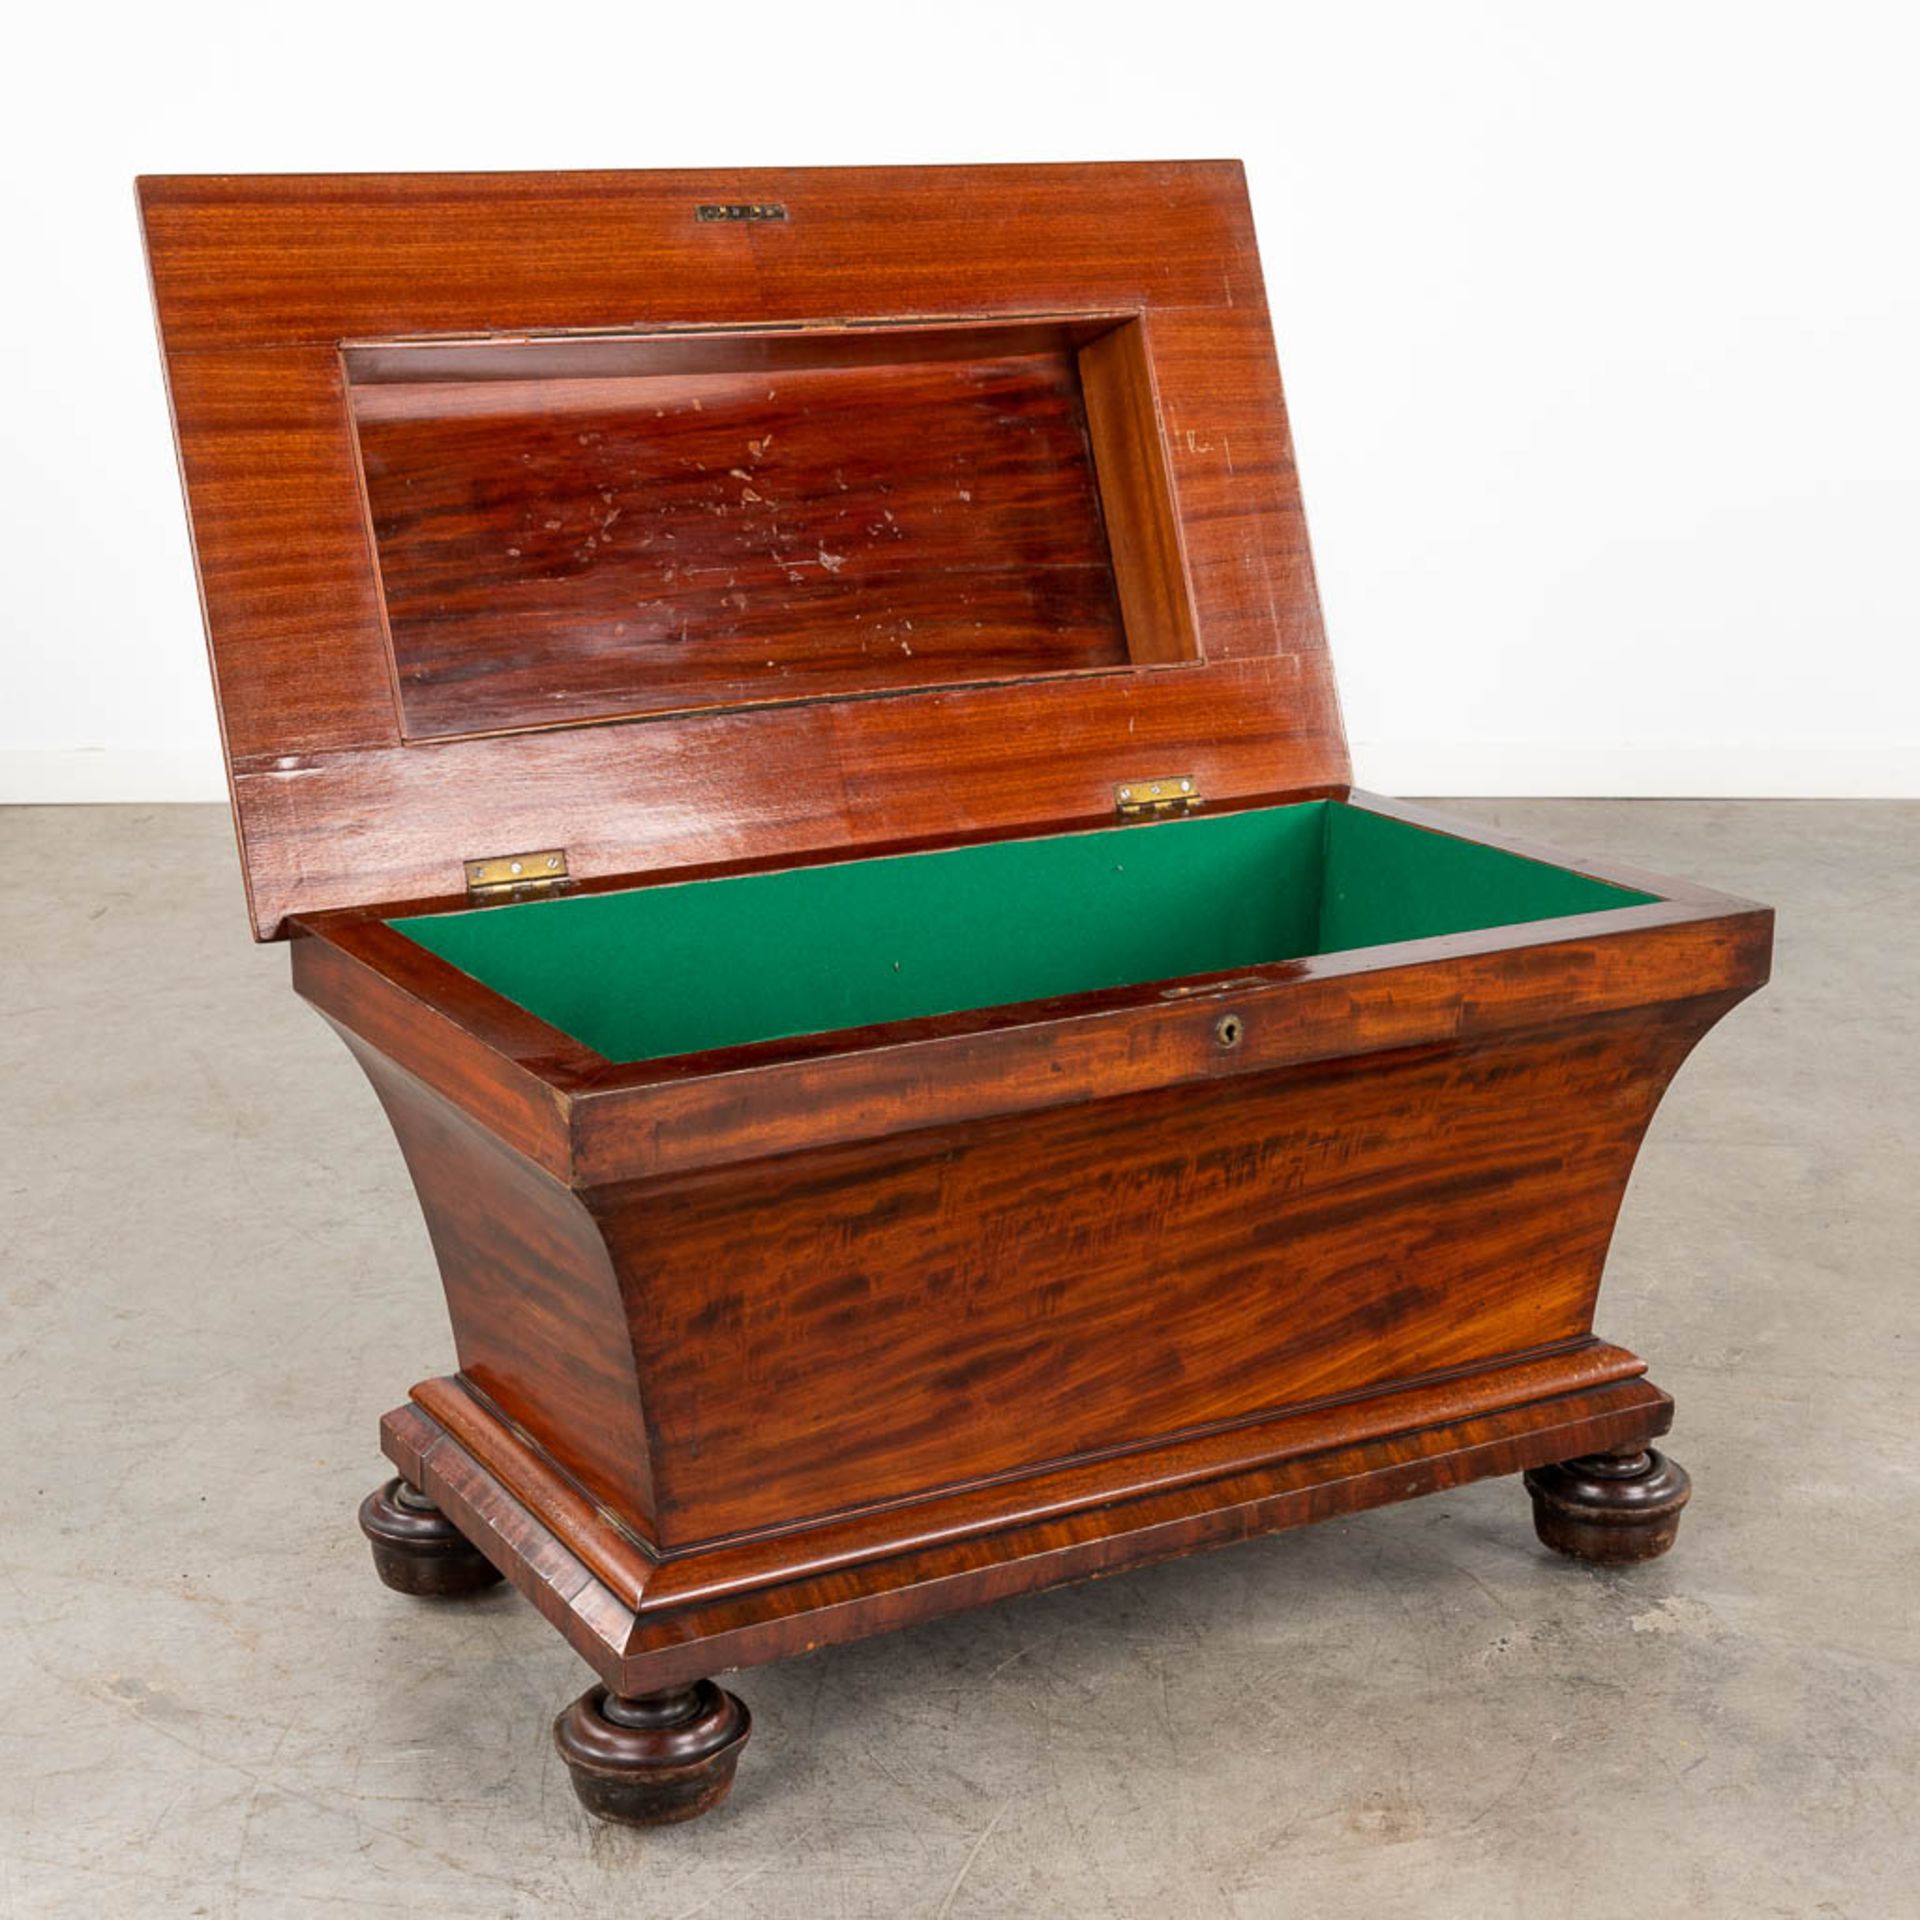 An exceptionally large English Cellarette or Wine Cooler, Mahogany, 19th C. (D:46 x W:79 x H:51 cm) - Image 3 of 13